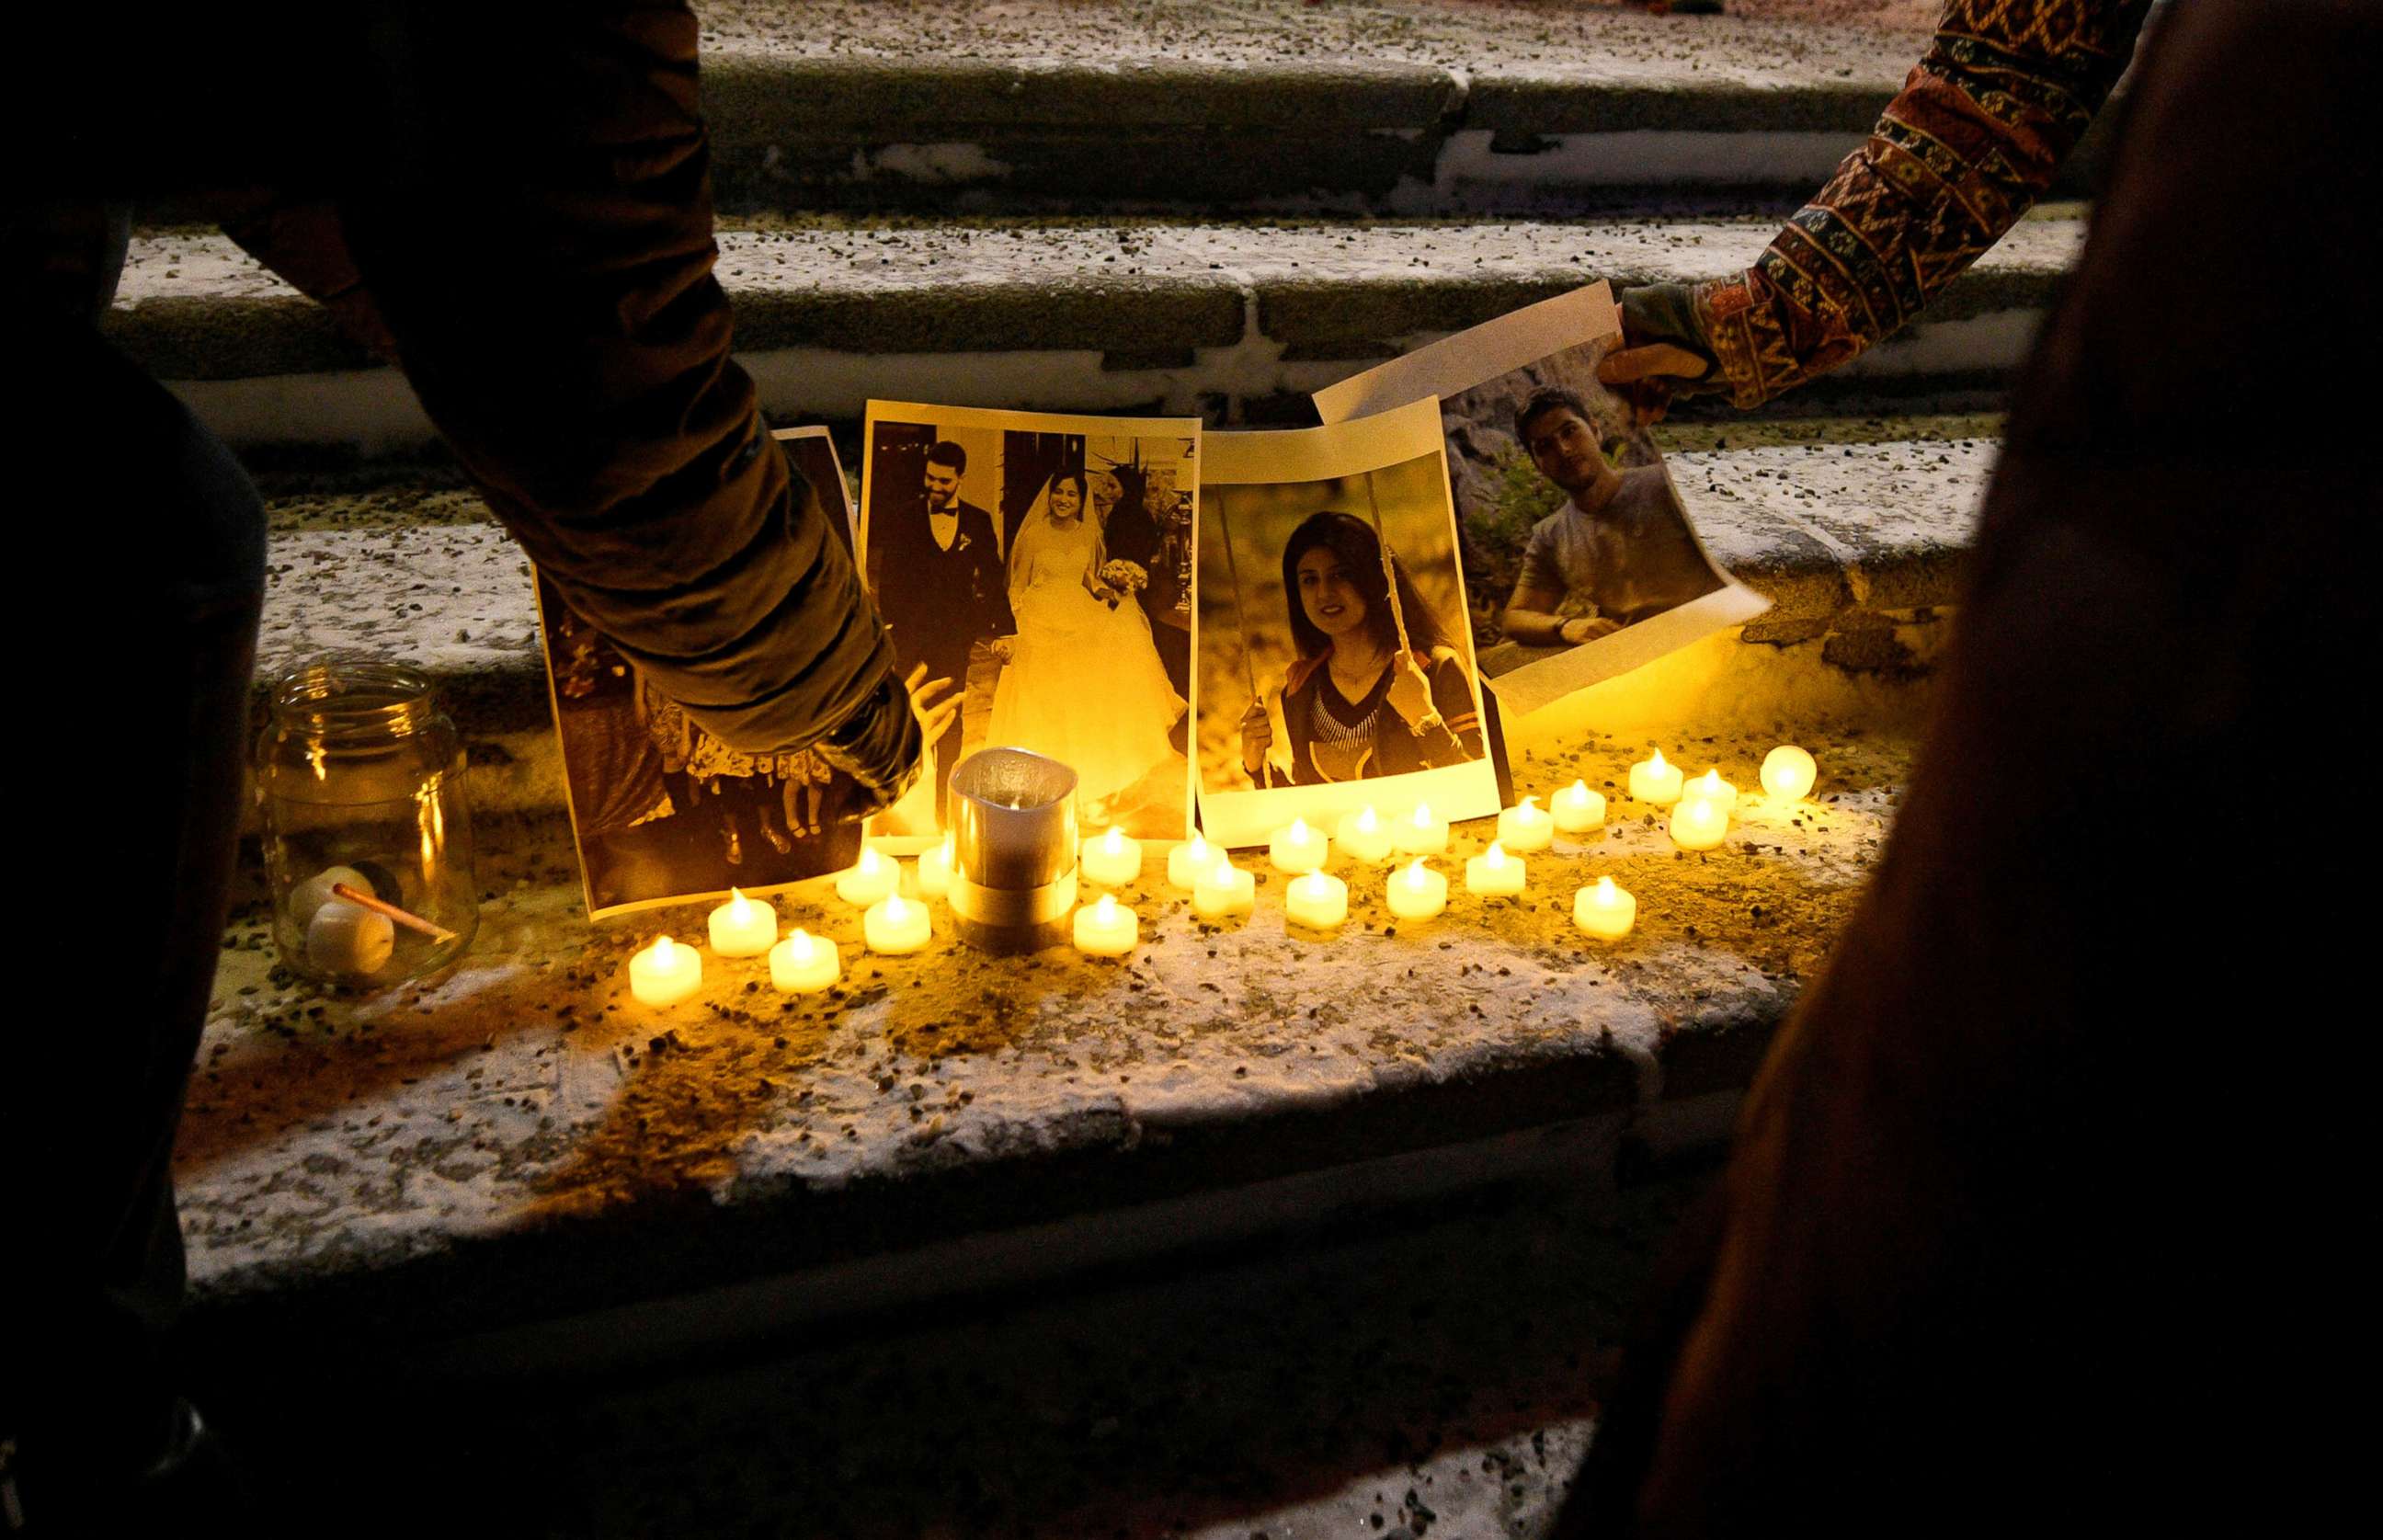 PHOTO: People attend a candlelight vigil held at the Edmonton Legislature building in memory of the victims of a Ukrainian passenger plane that crashed in Iran, in Edmonton, Alberta, Canada, June 8, 2020.